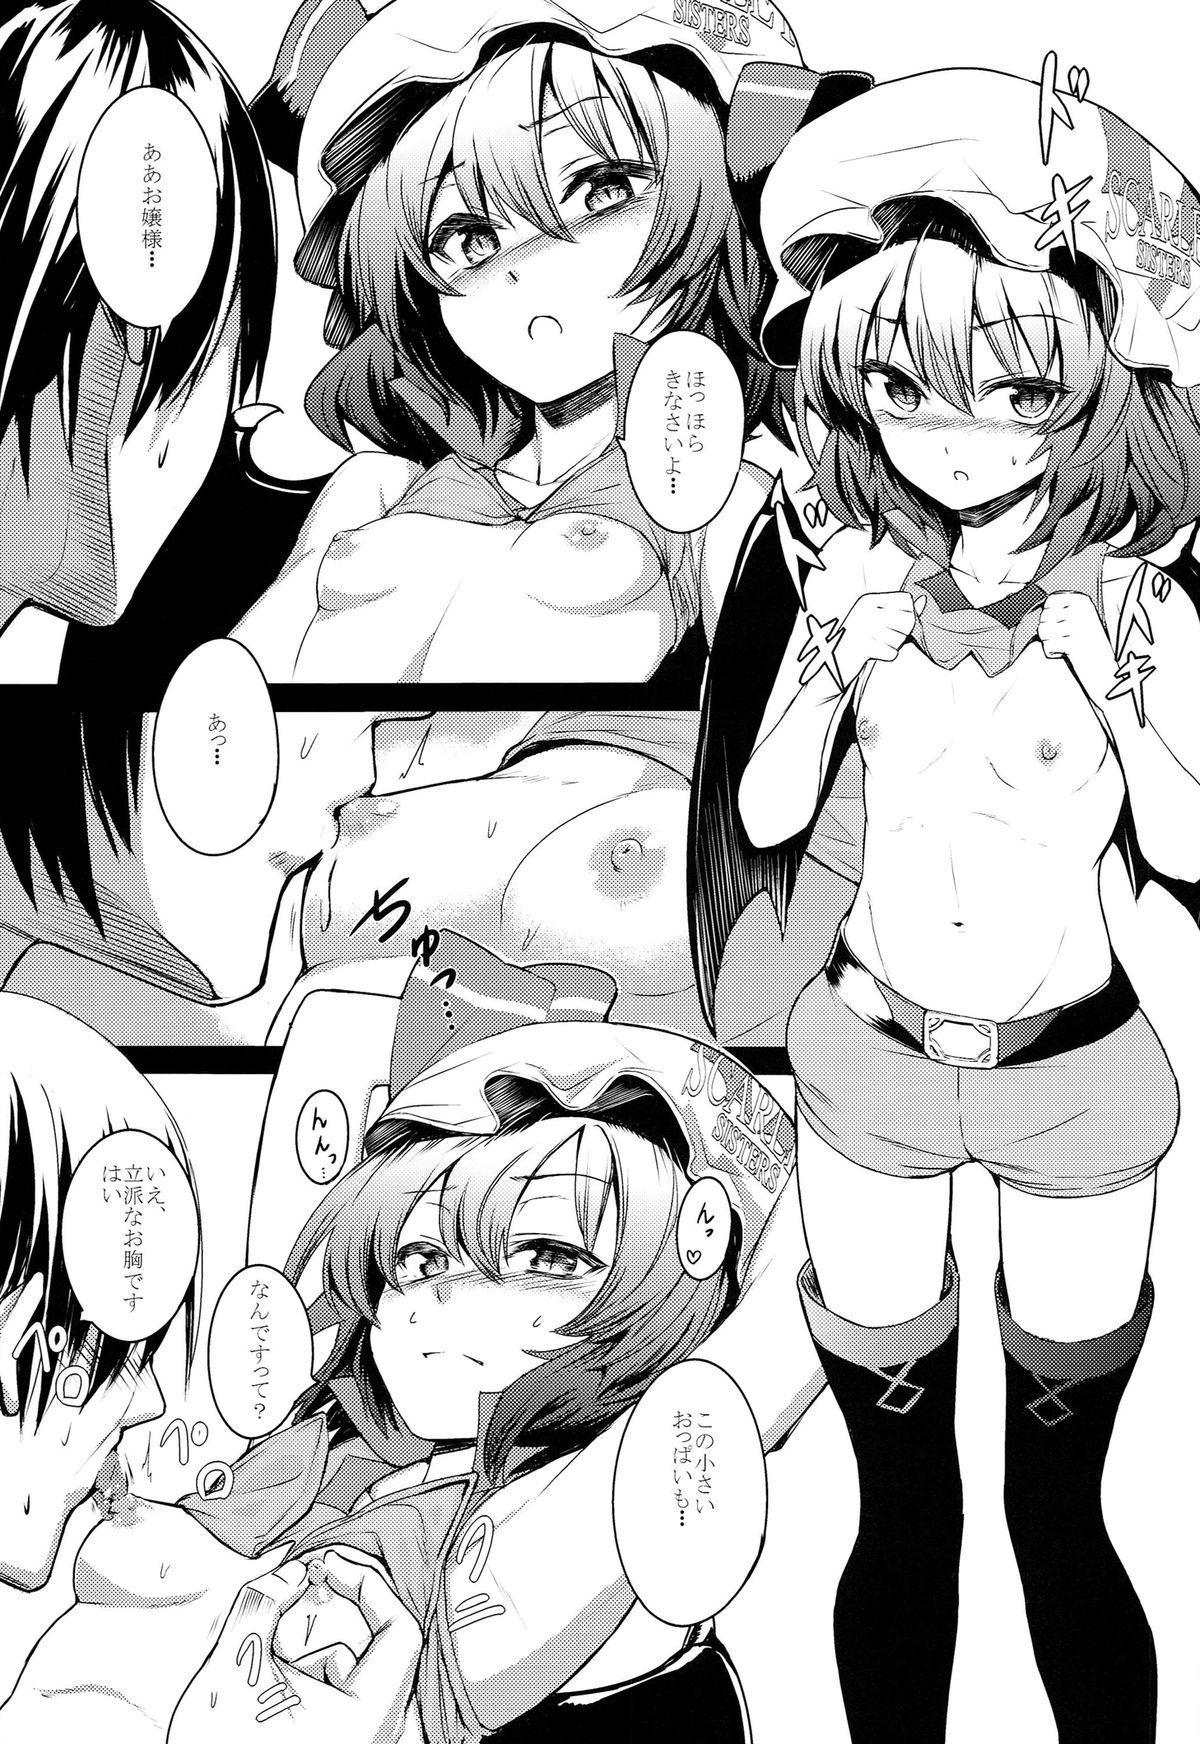 All TOUHOU RACE QUEENS COLLABO CLUB - Touhou project Nipple - Page 6